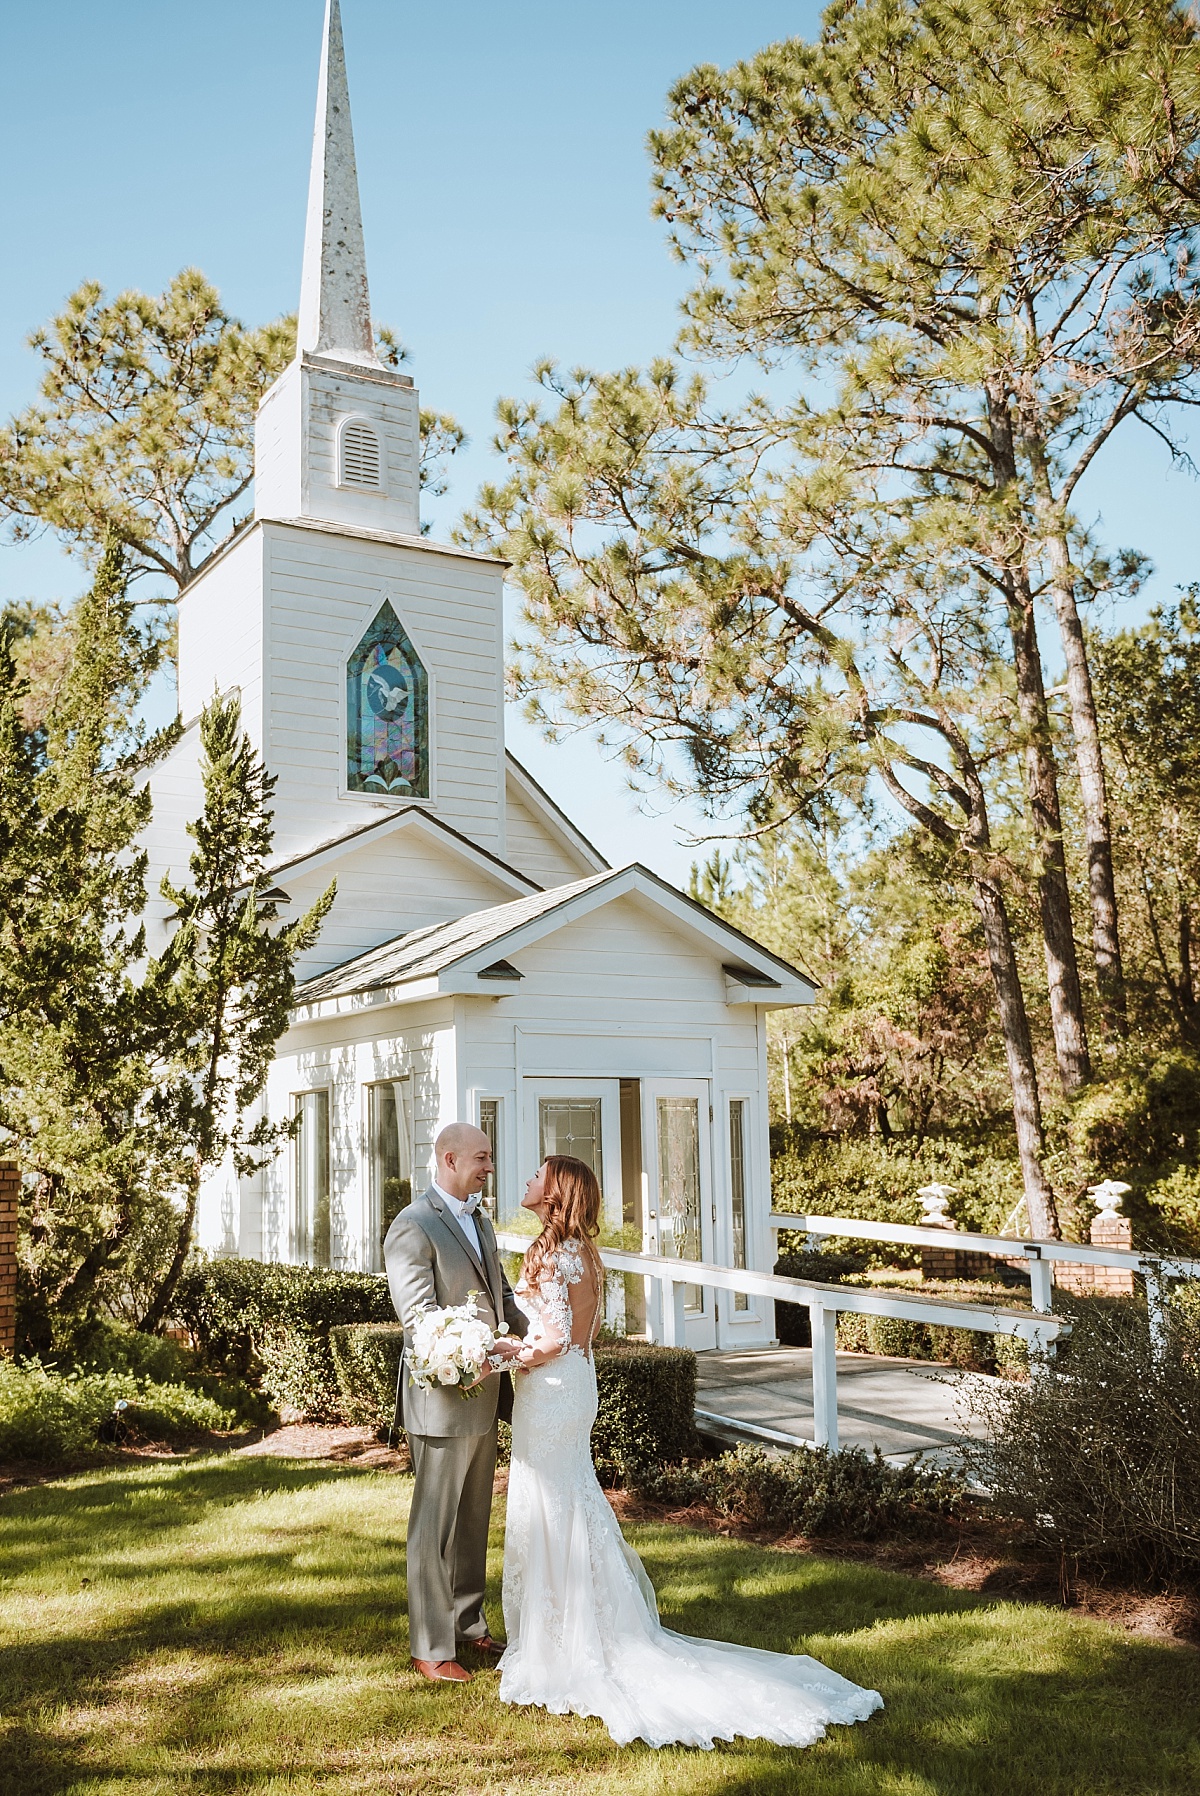 First Look at the Gulf Shores Wedding Chapel